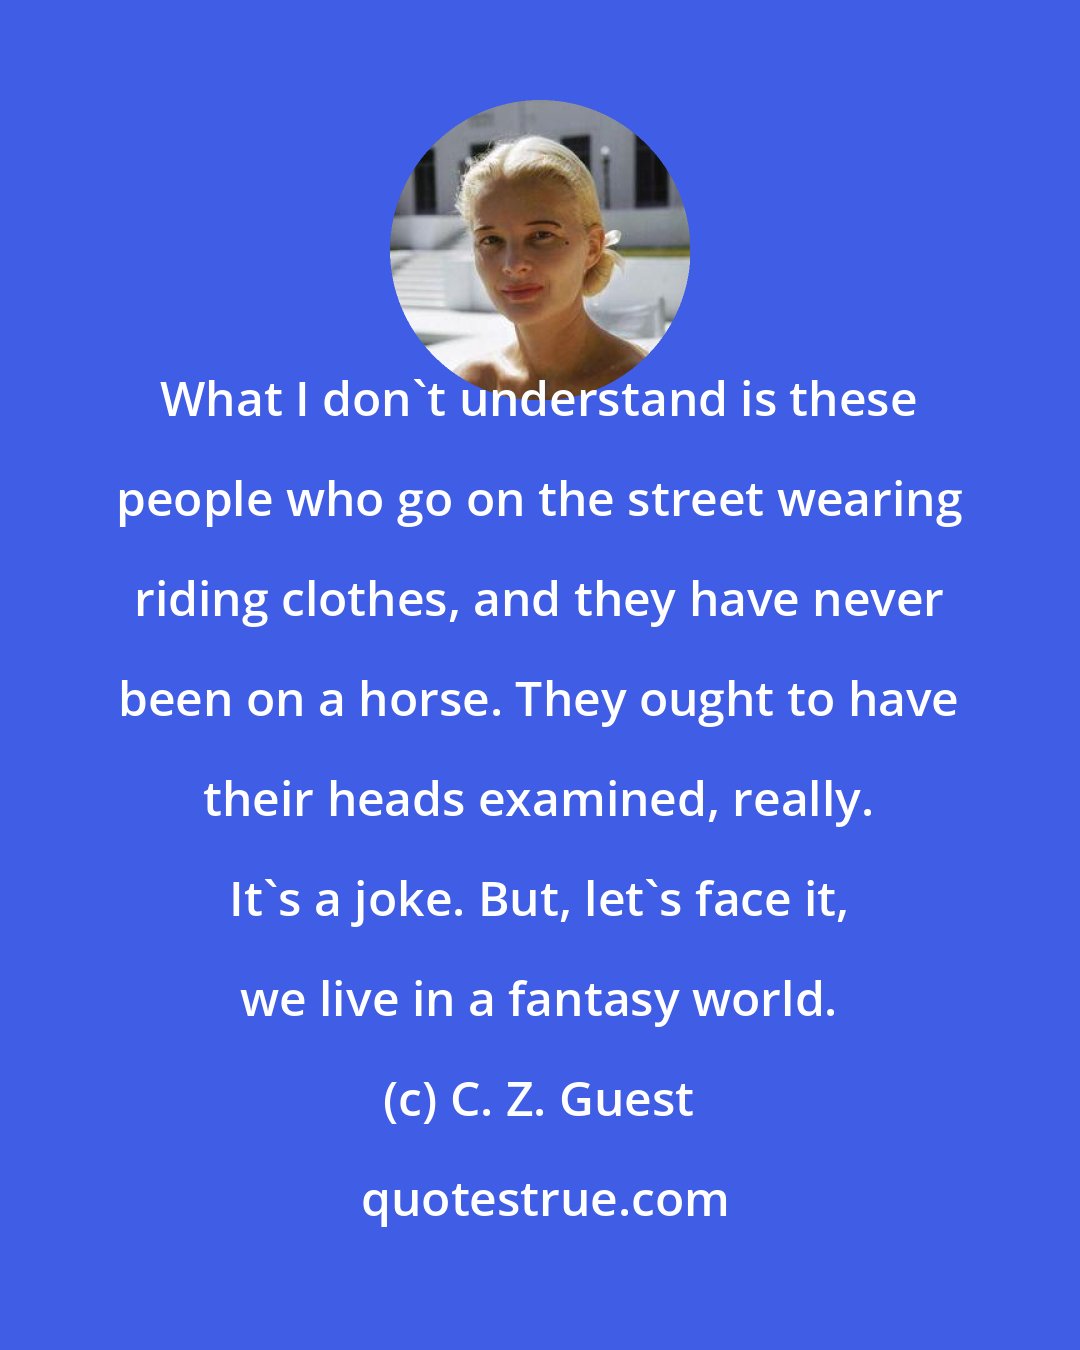 C. Z. Guest: What I don't understand is these people who go on the street wearing riding clothes, and they have never been on a horse. They ought to have their heads examined, really. It's a joke. But, let's face it, we live in a fantasy world.